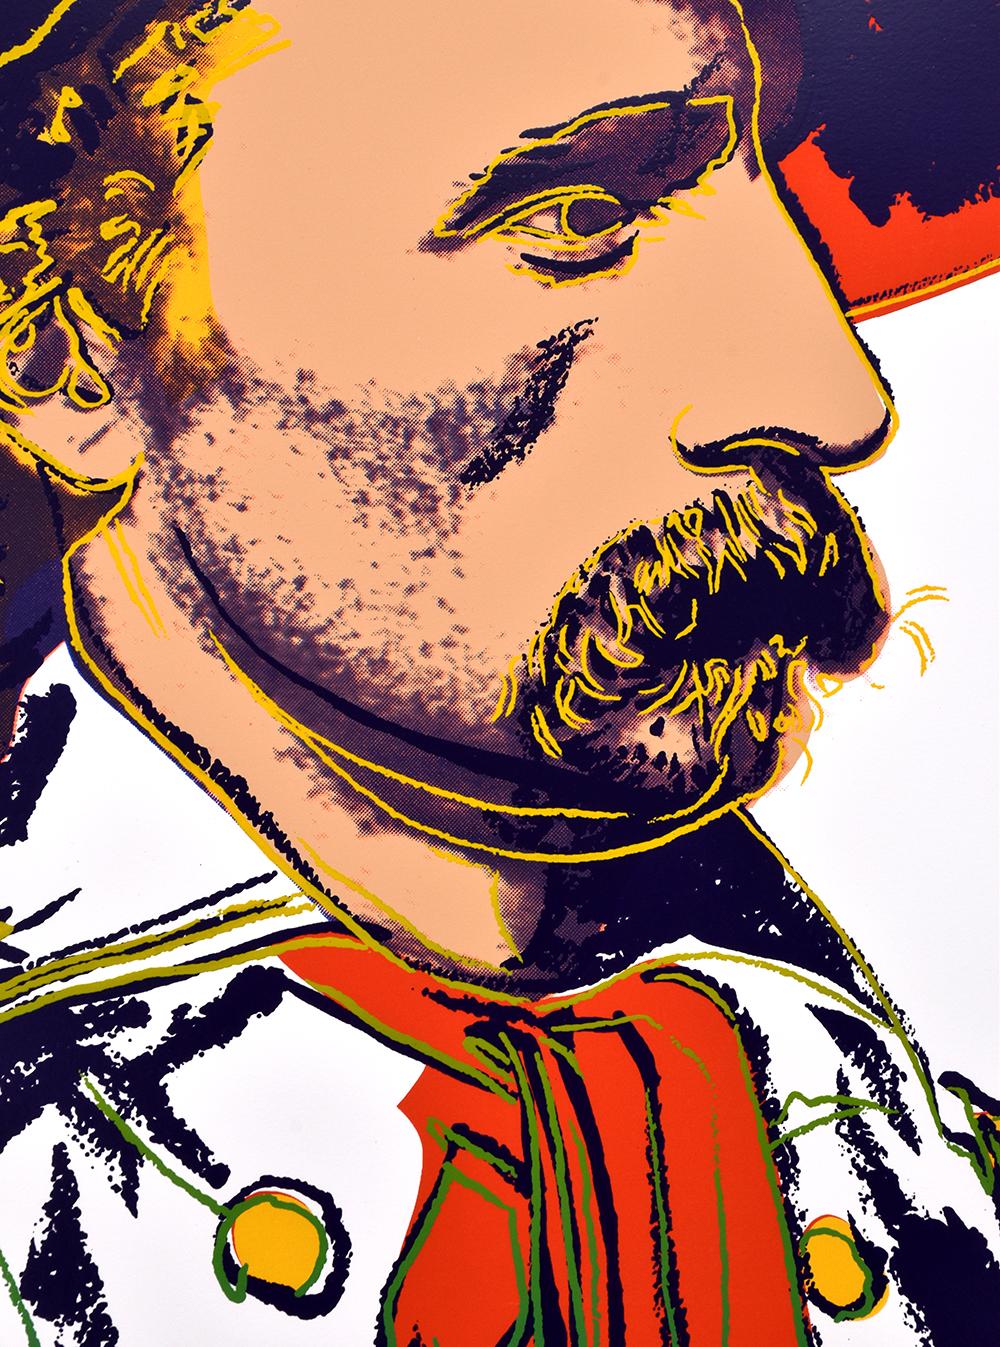 Andy Warhol General Custer, 1986 portrays the Civil War figure in his personalized uniform. This work is mostly comprised of red, white, and blue, as well as some gold details, emphasizing his American identity. His persona is alienating and aloof